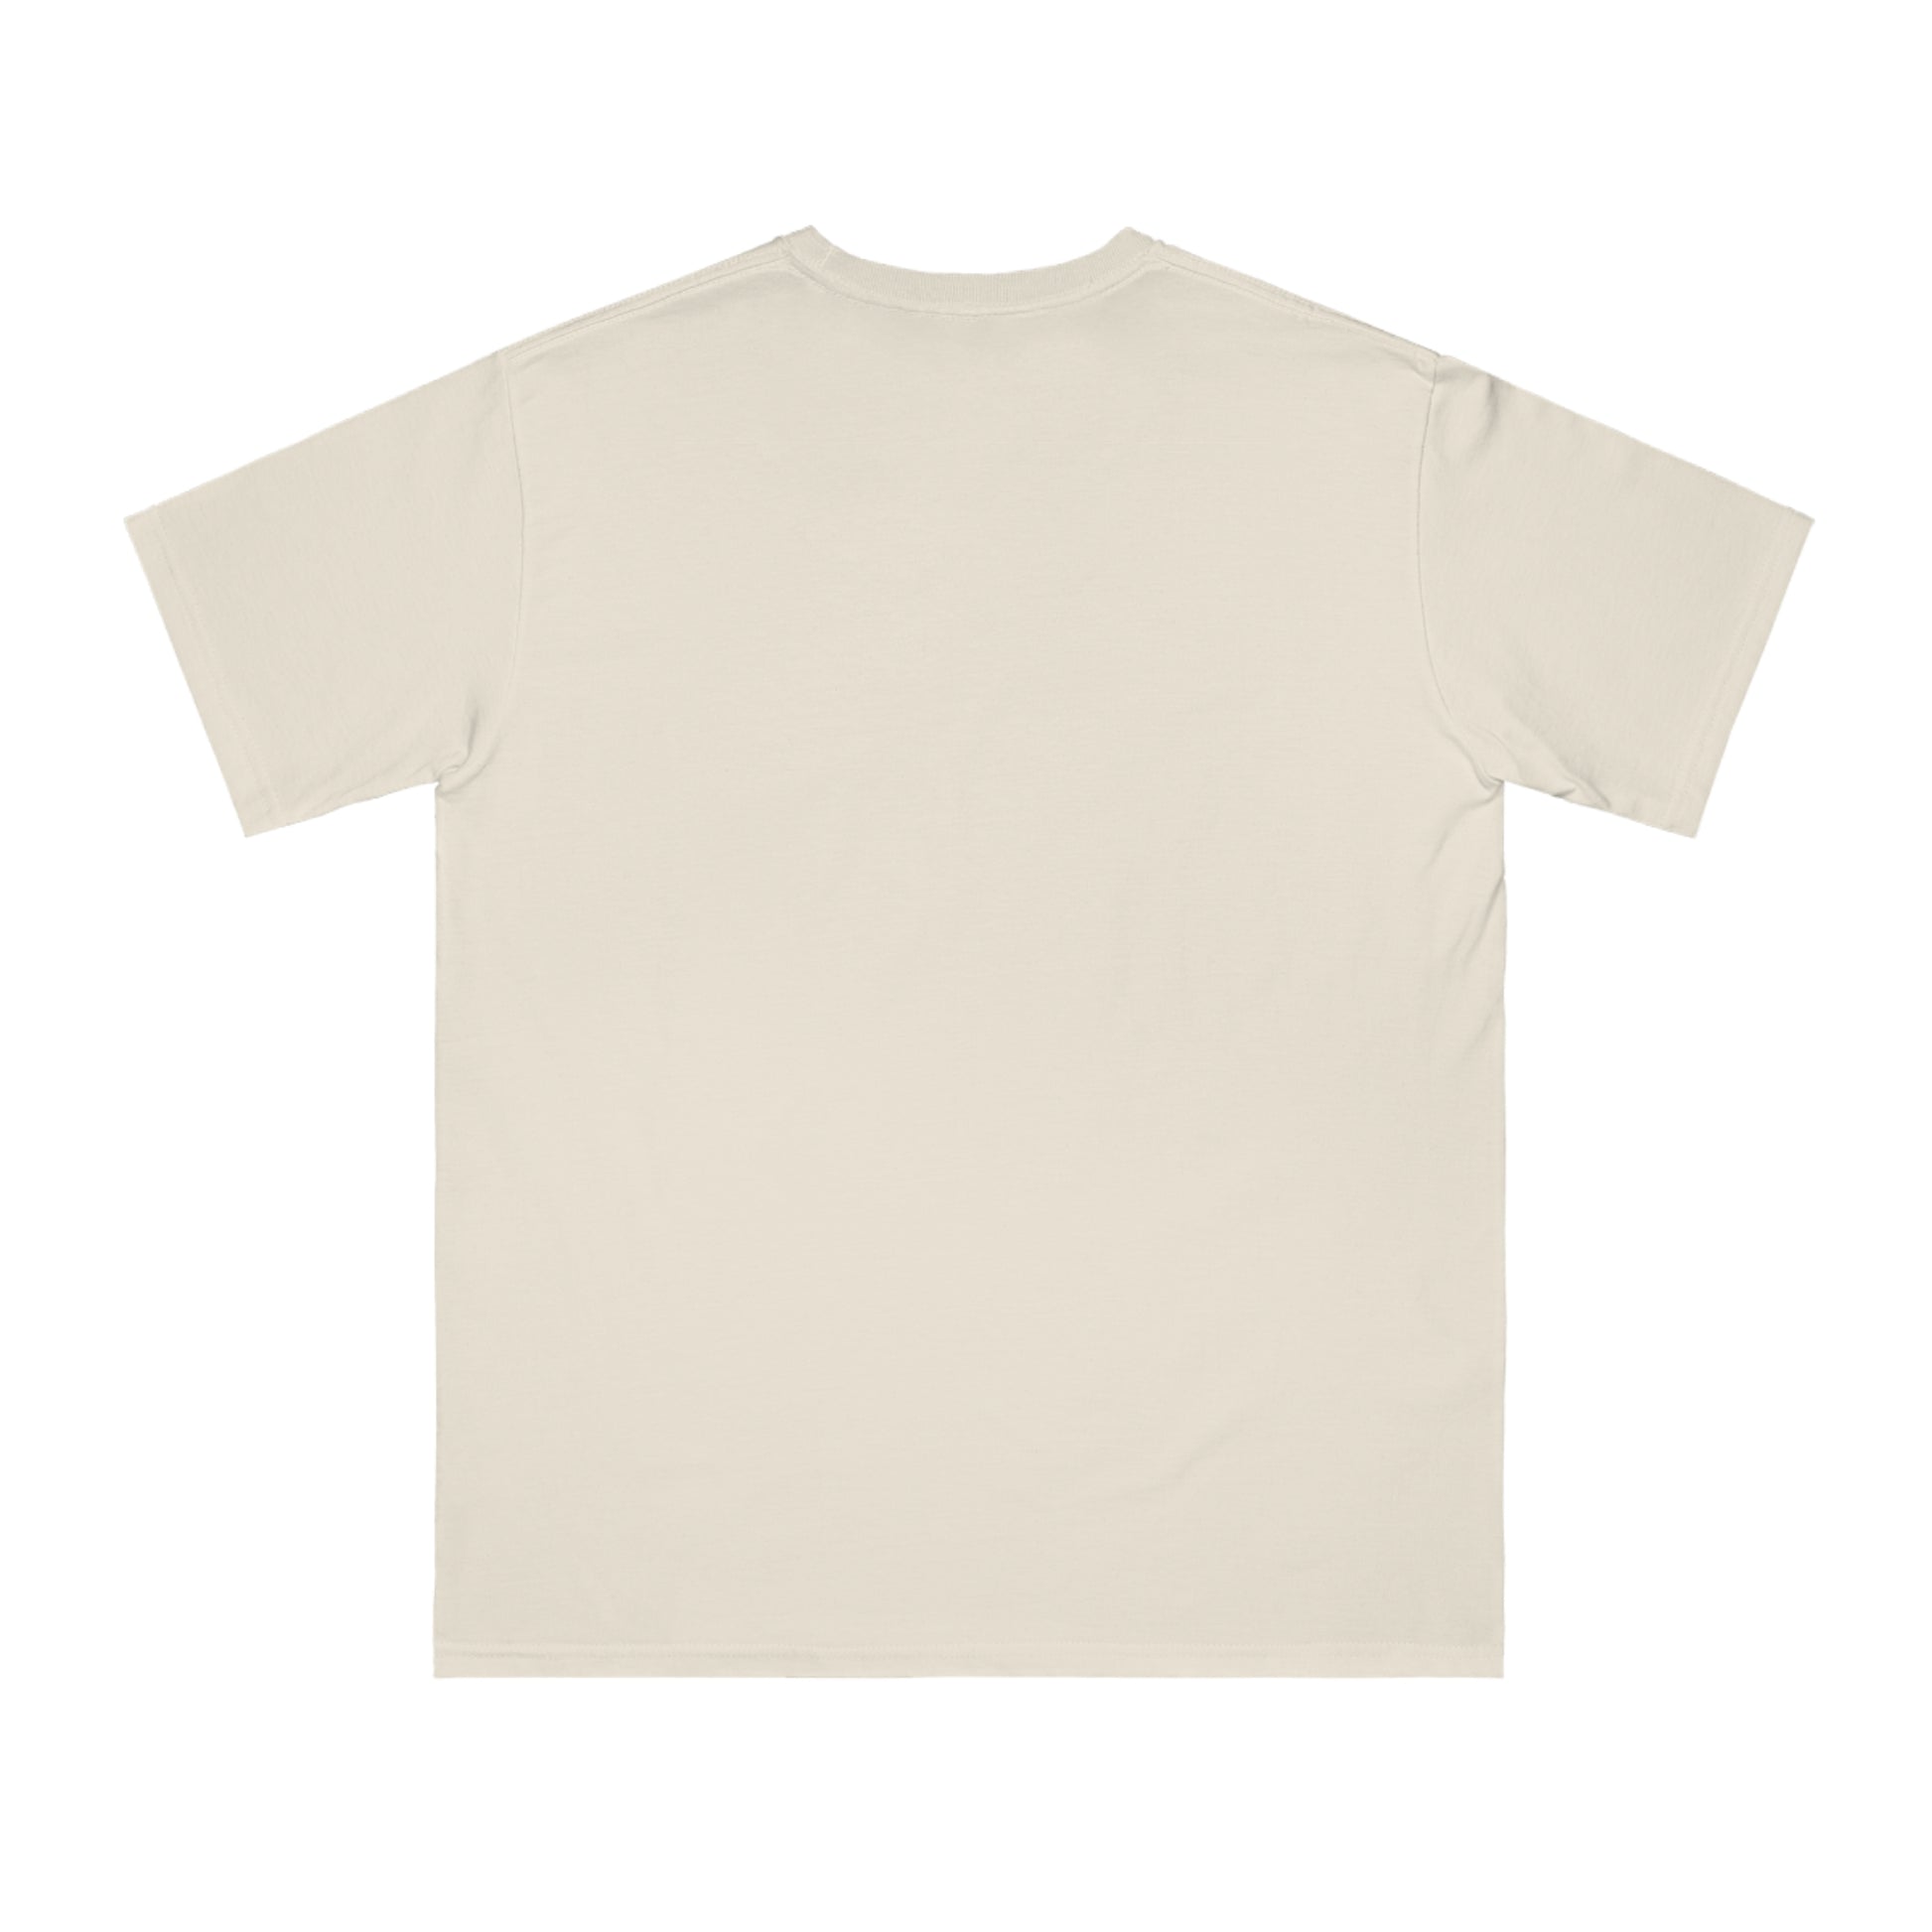 a white t - shirt that has a small logo on it